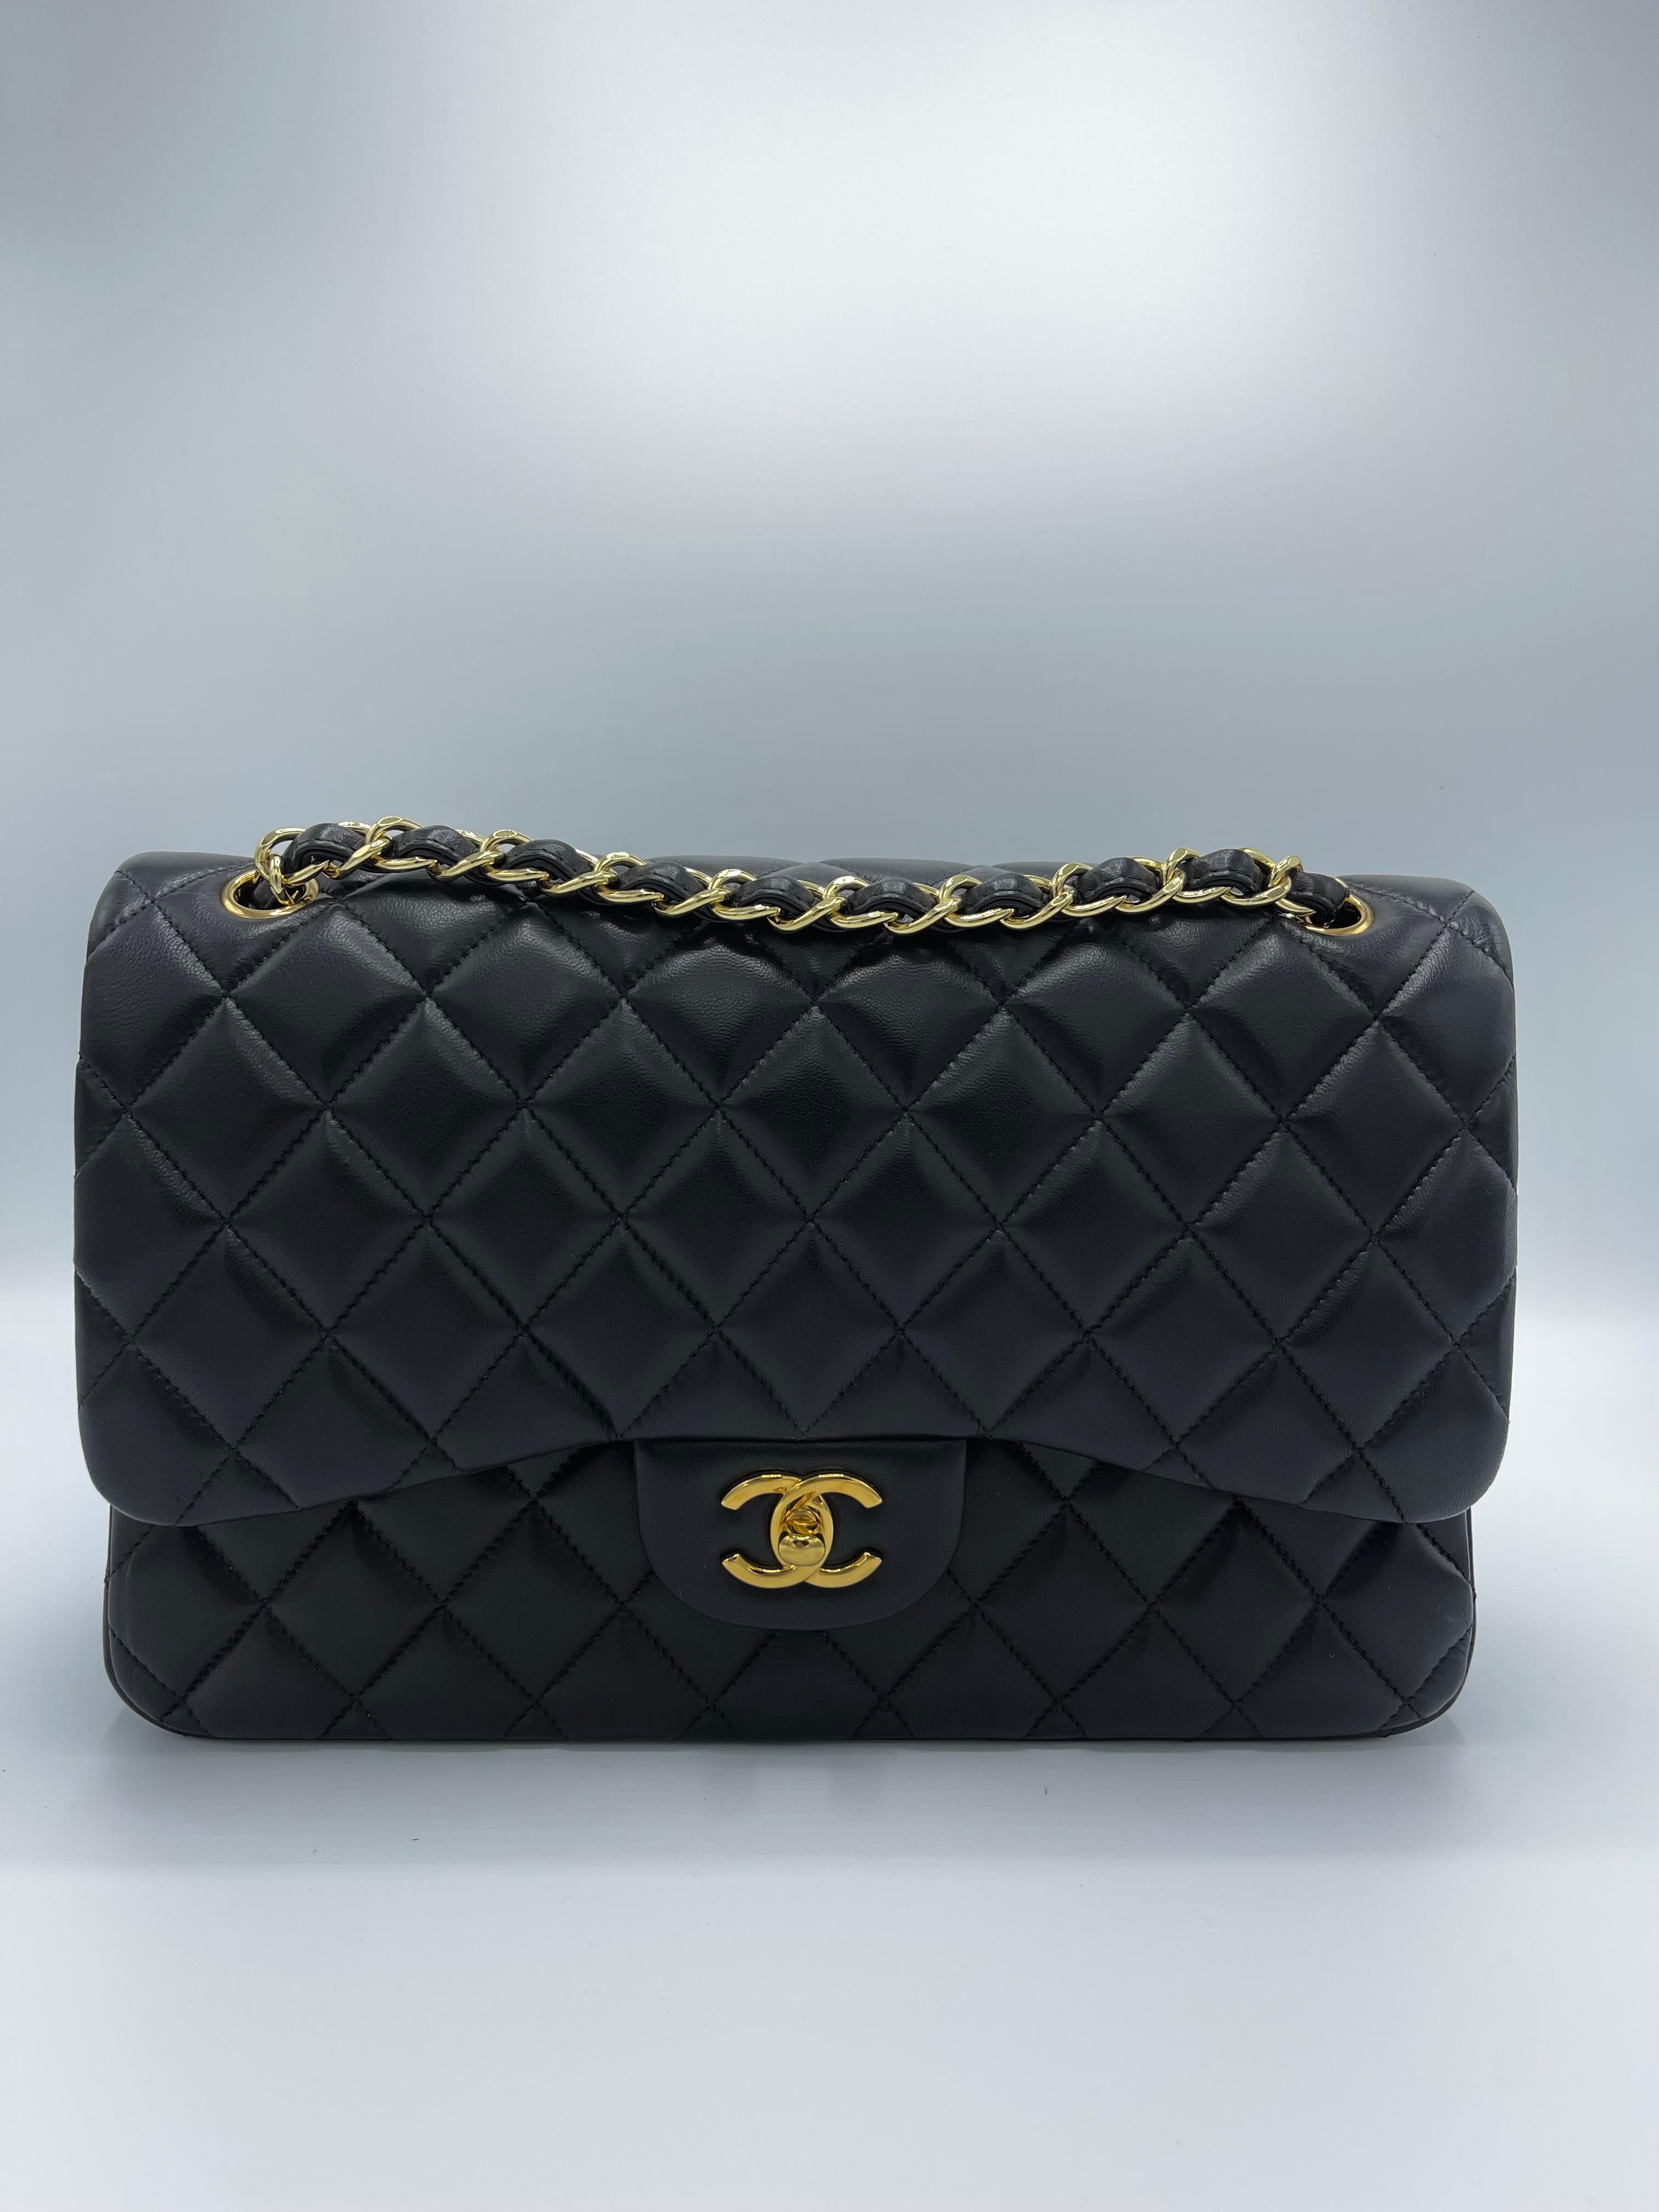 The famous Chanel Classic Double Flap new model shoulder bag is created in black diamond-quilted lambskin leather and adorned with gold-tone turnlock and chain hardware from an early 2010 collection. 
The bag has a polished gold leather-threaded